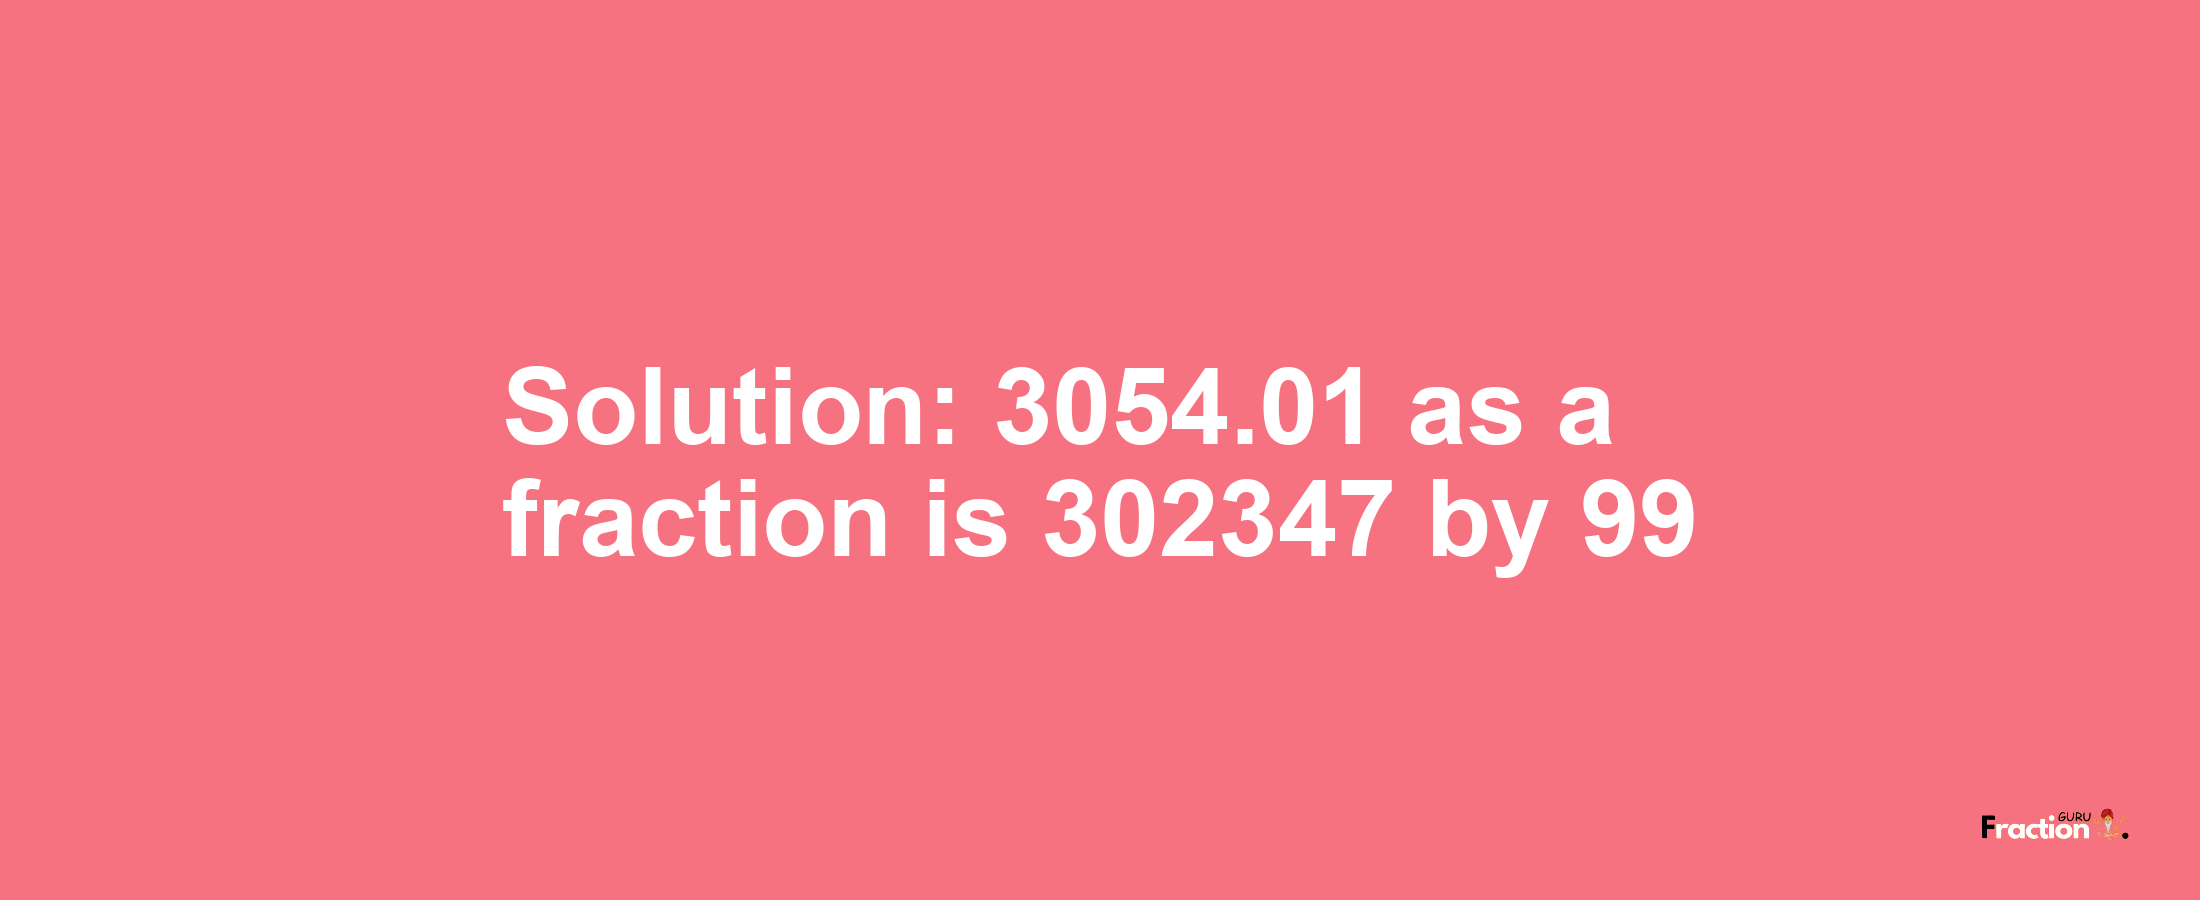 Solution:3054.01 as a fraction is 302347/99